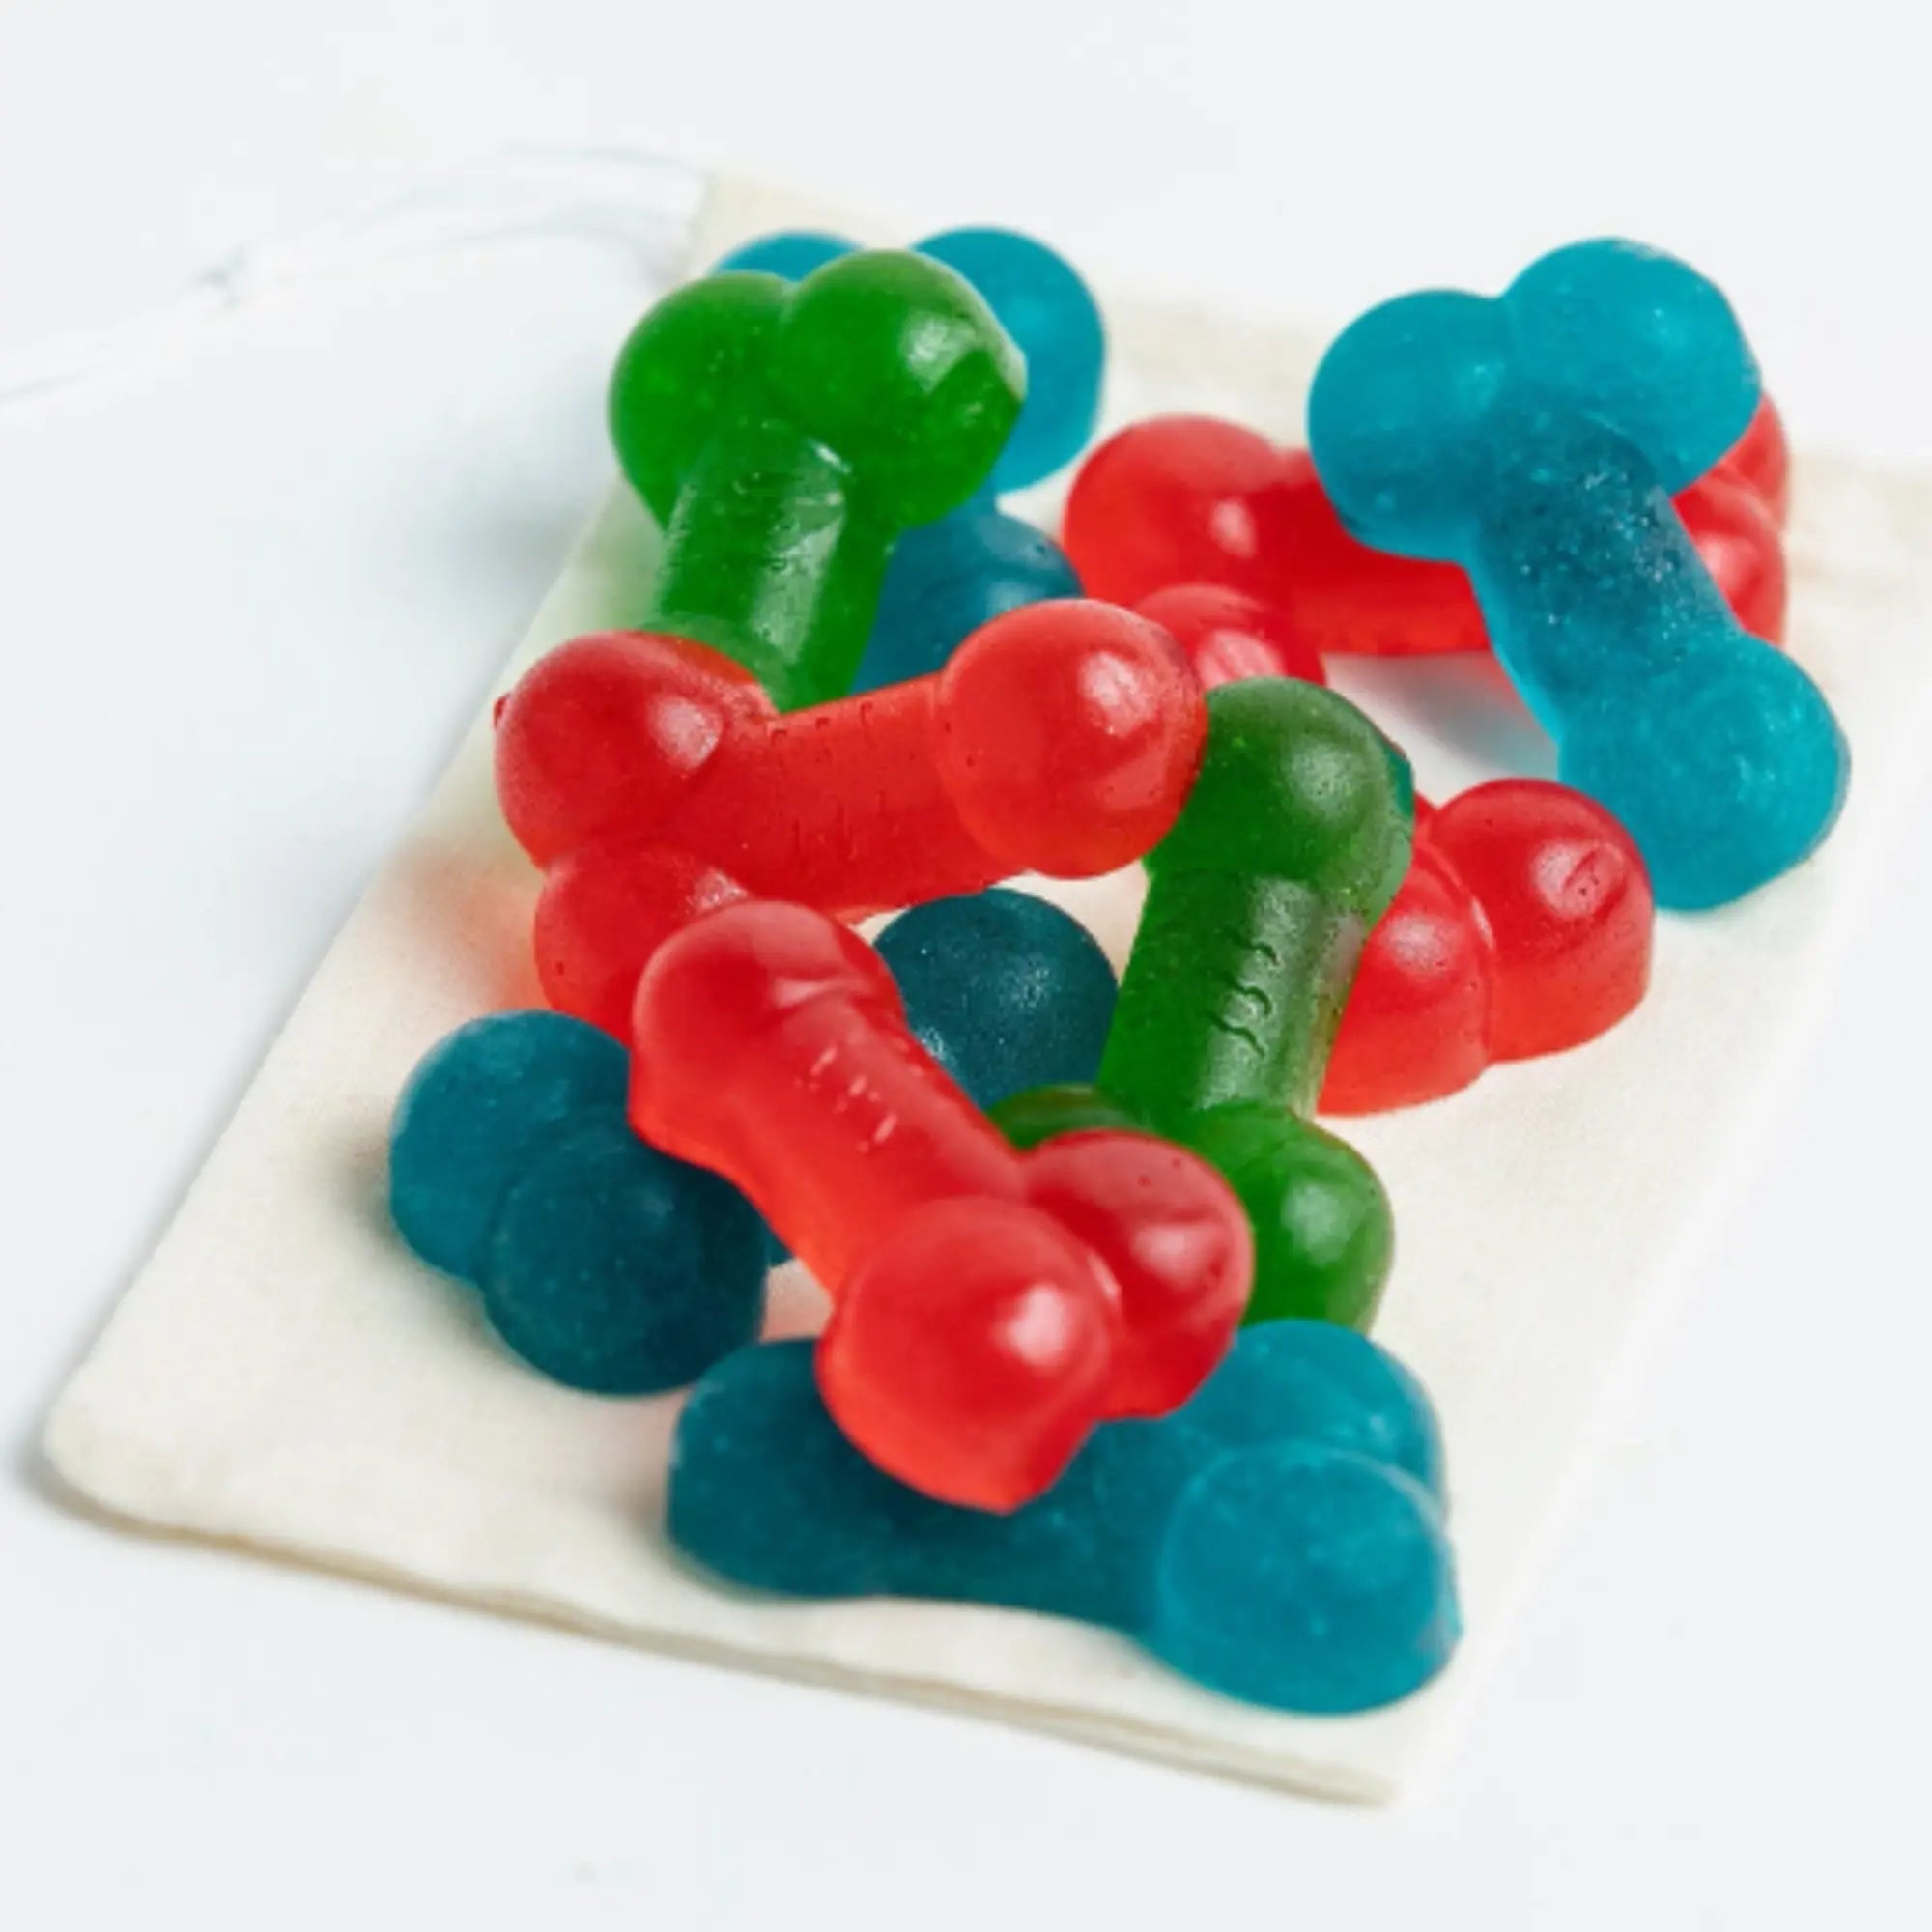 Bag of Dicks: Gummy Candy - DickAtYourDoor. Order a bag o dicks and send them to your friend or enemy. 